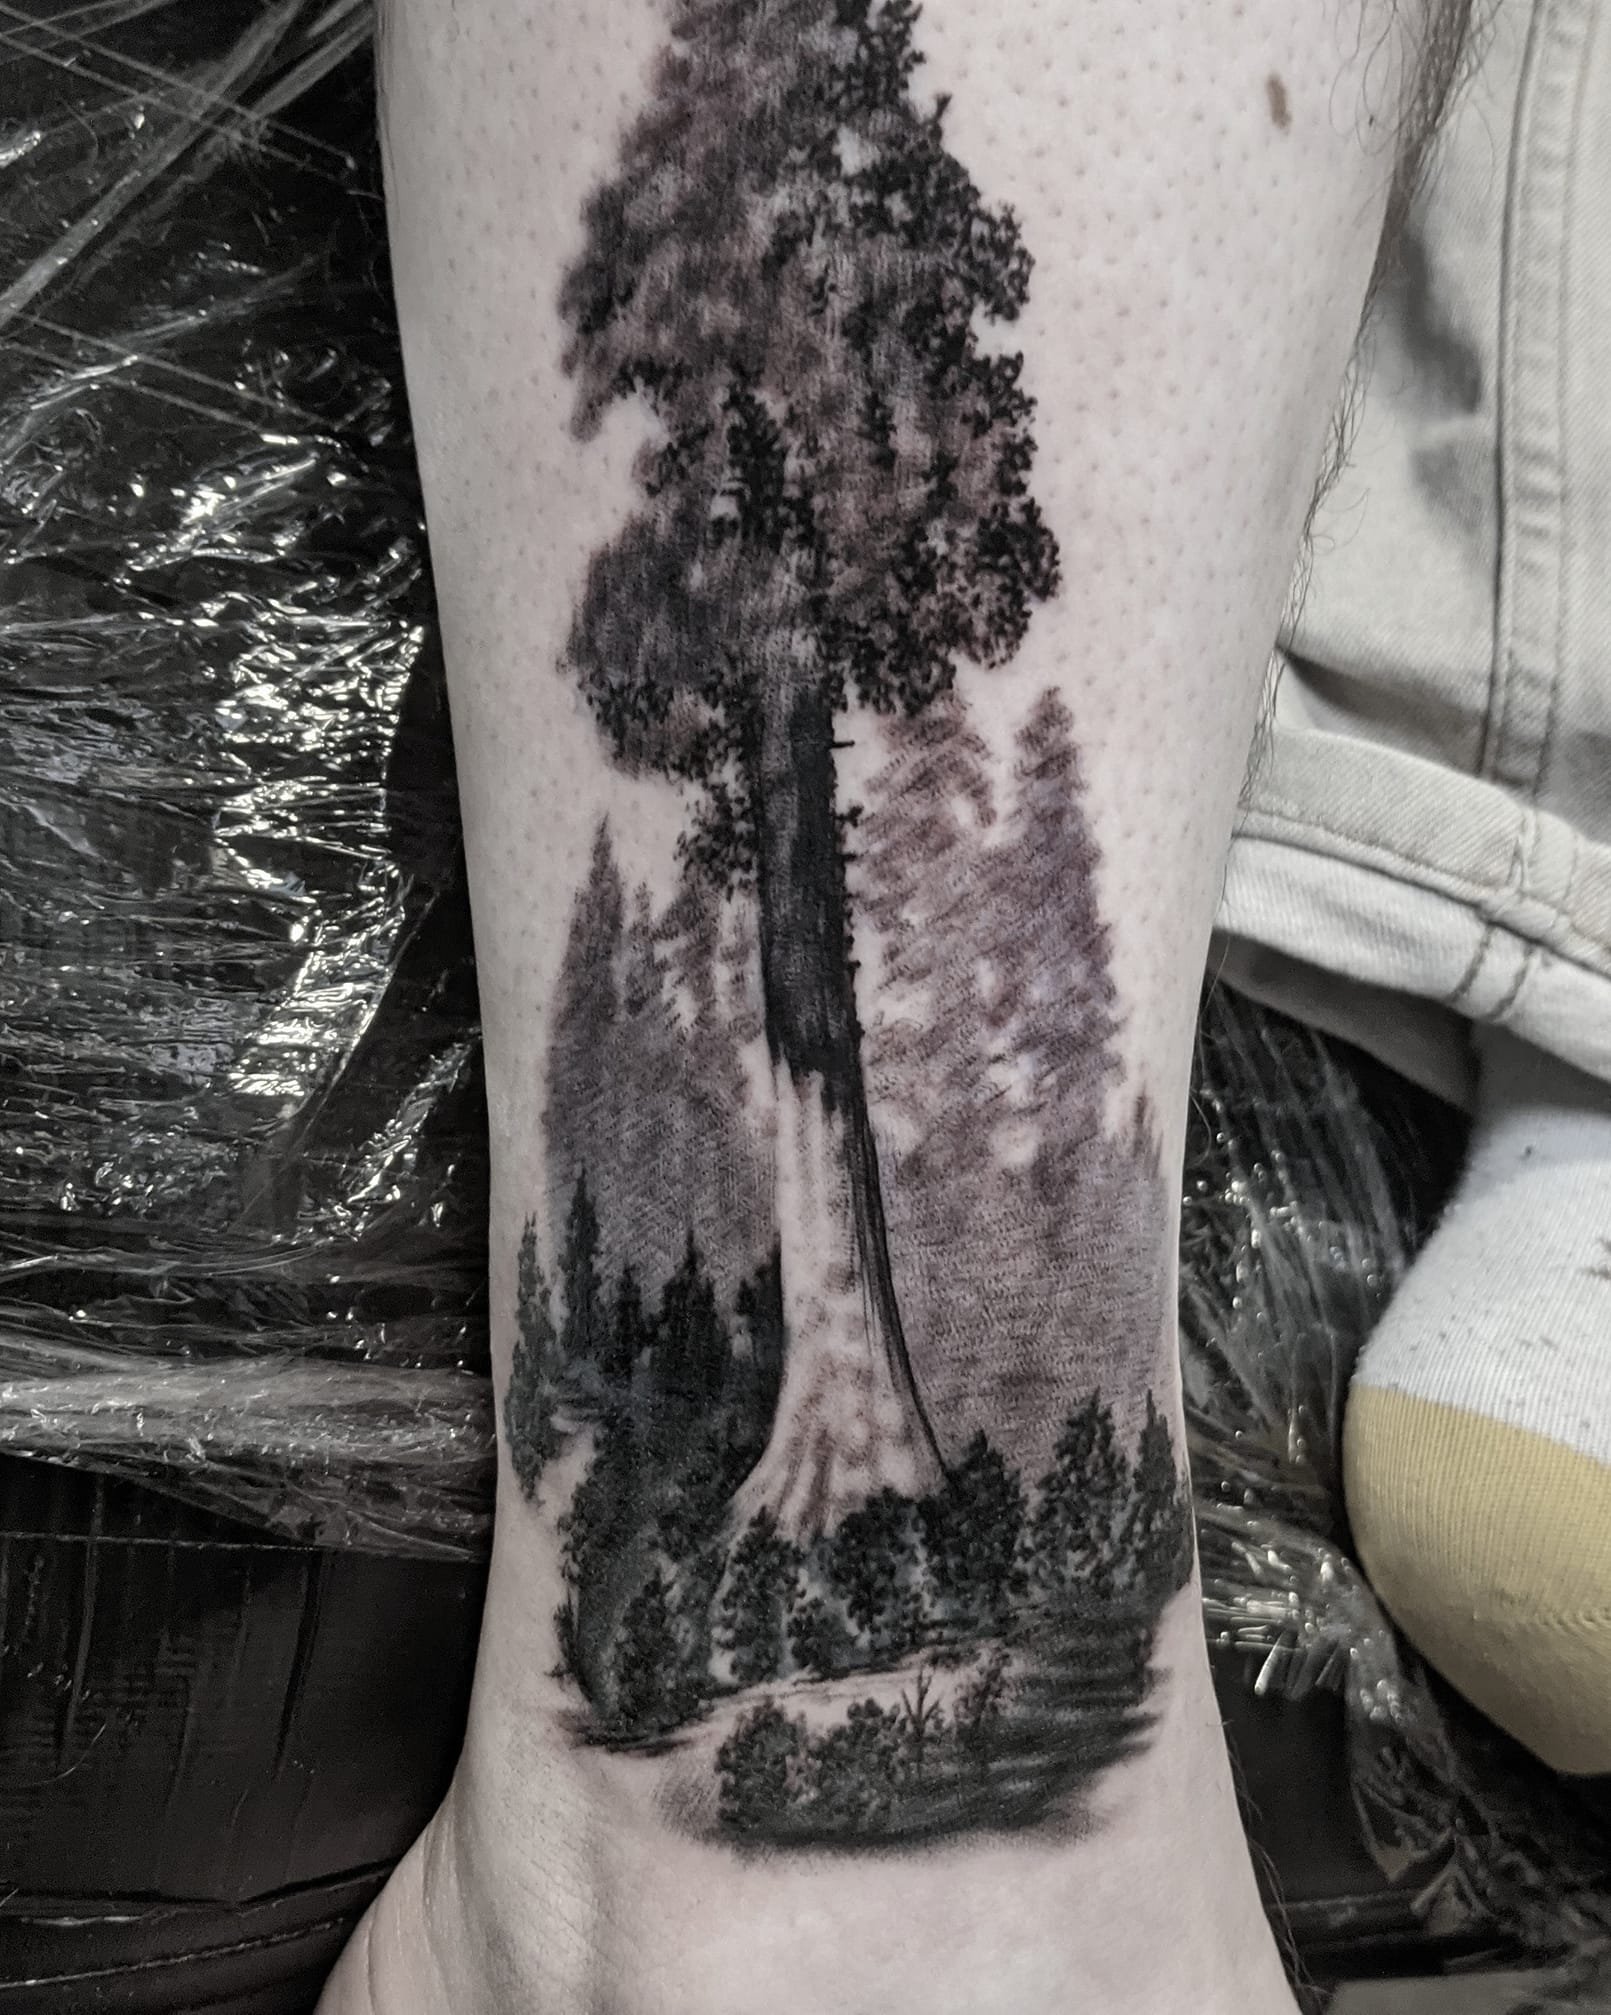 Arborist Tattoos  Page 5  General chat  Arbtalk  The Social Network For  Arborists